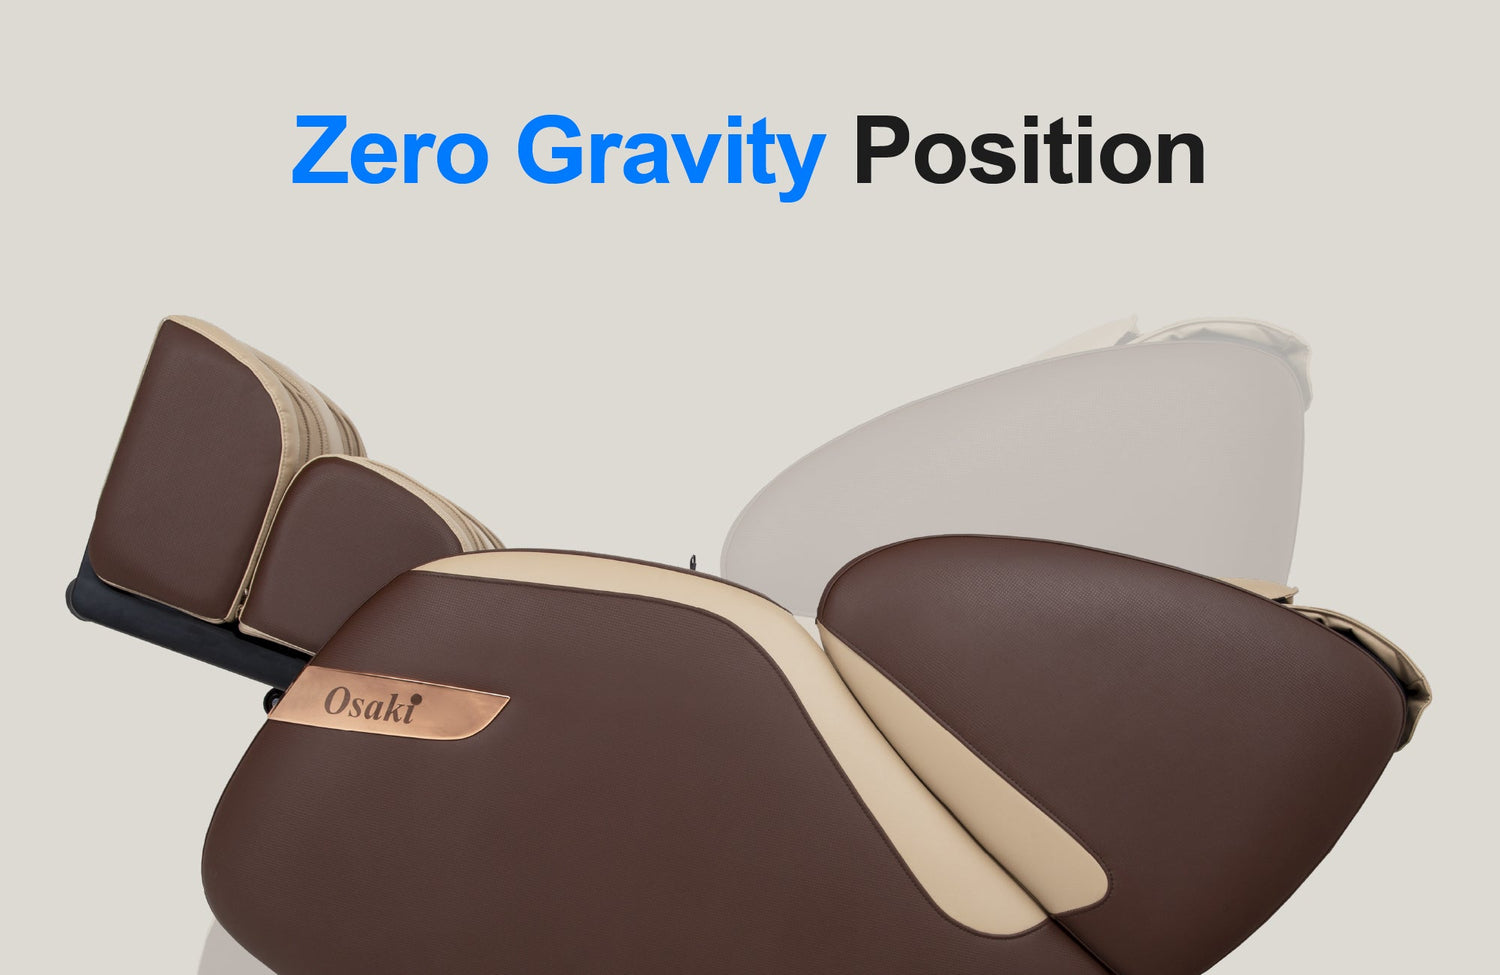 The Osaki OS-Champ massage chair features two stages of zero gravity which align your back and thighs optimally, enhancing comfort and blood flow.